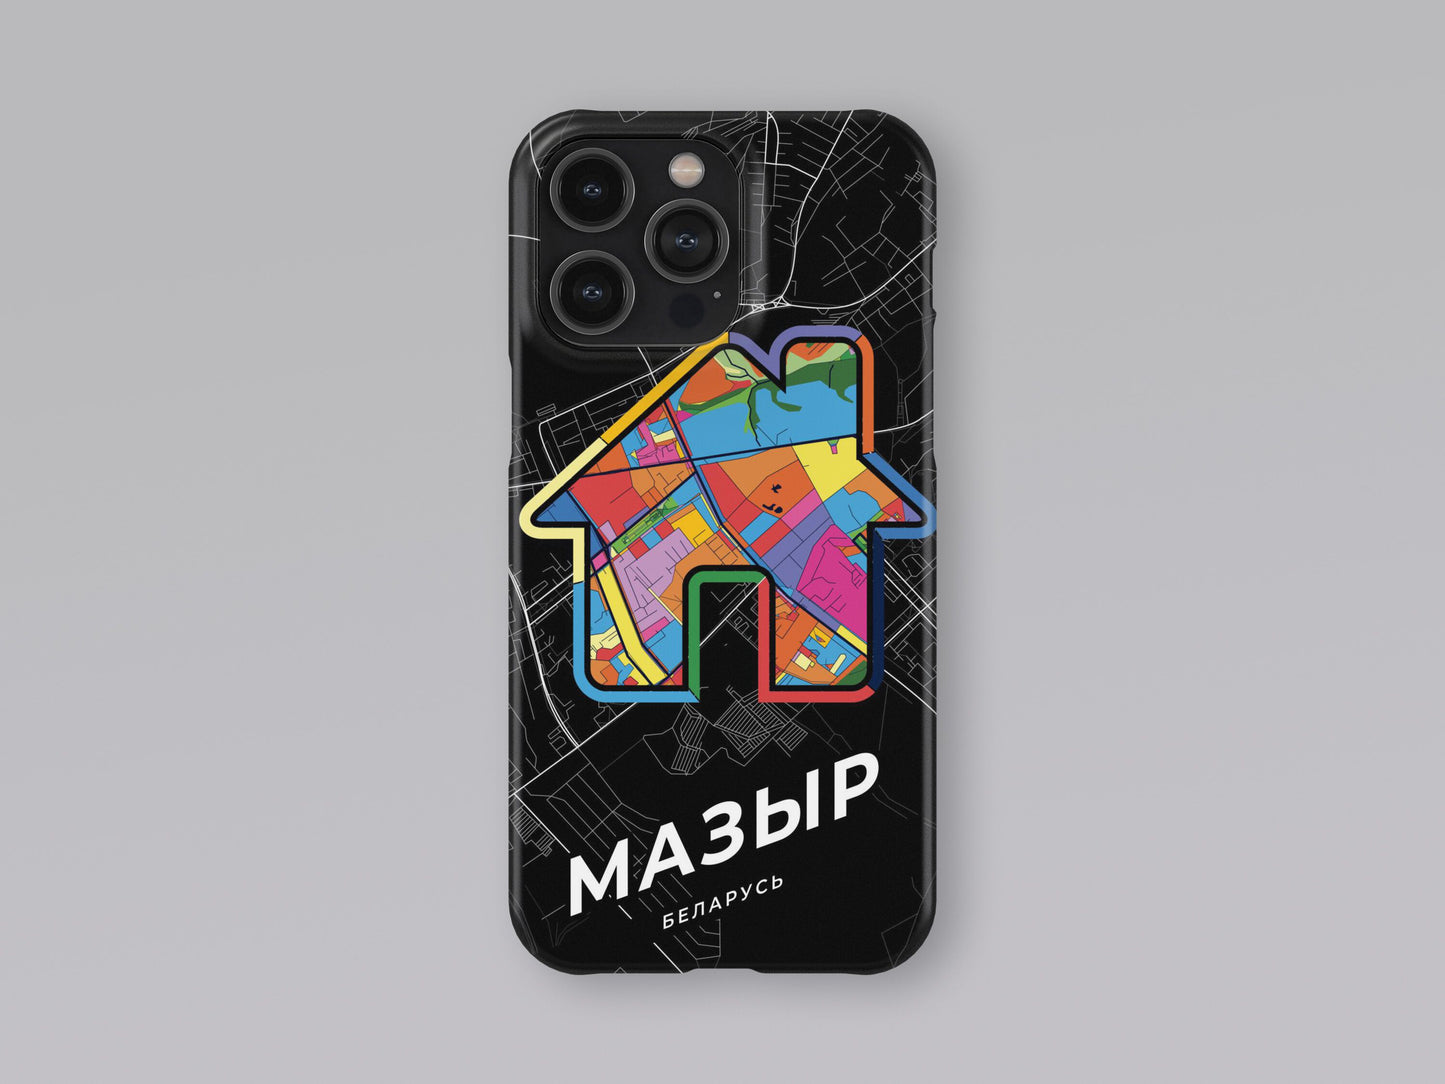 Мазыр Беларусь slim phone case with colorful icon. Birthday, wedding or housewarming gift. Couple match cases. 3